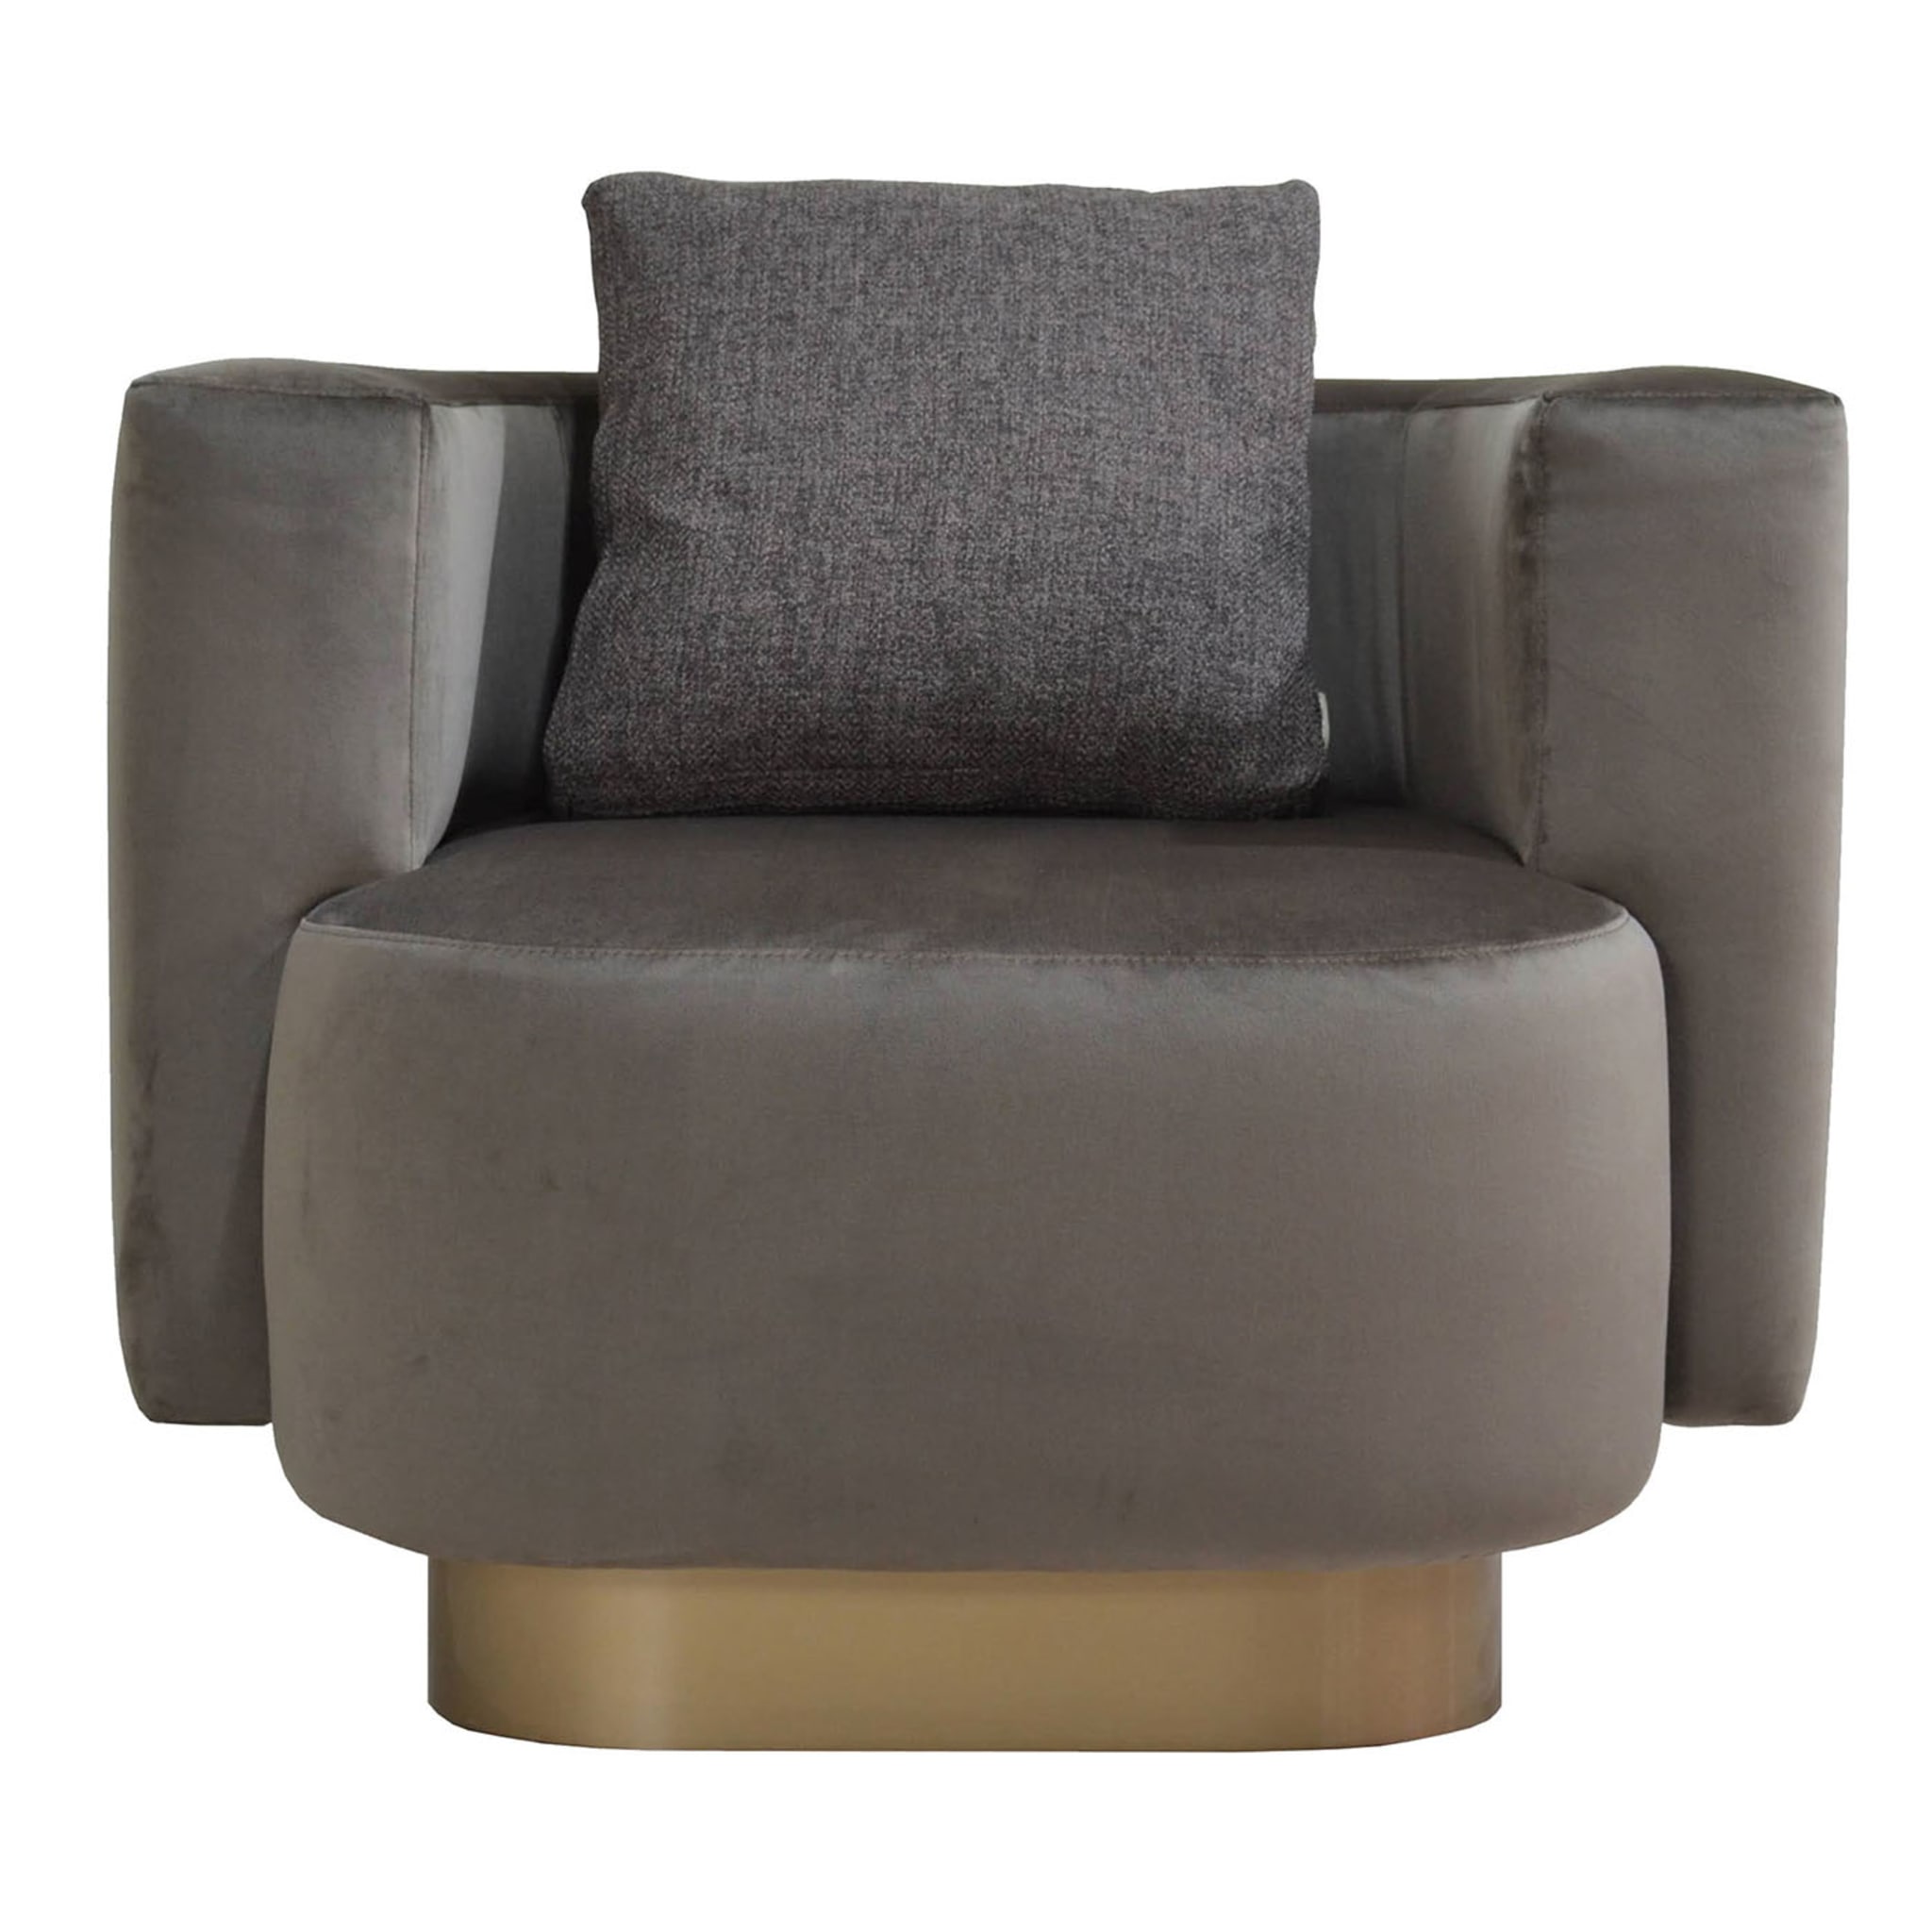 Italian Contemporary Lounge Upholstered Armchair in Mocha Brown - Main view